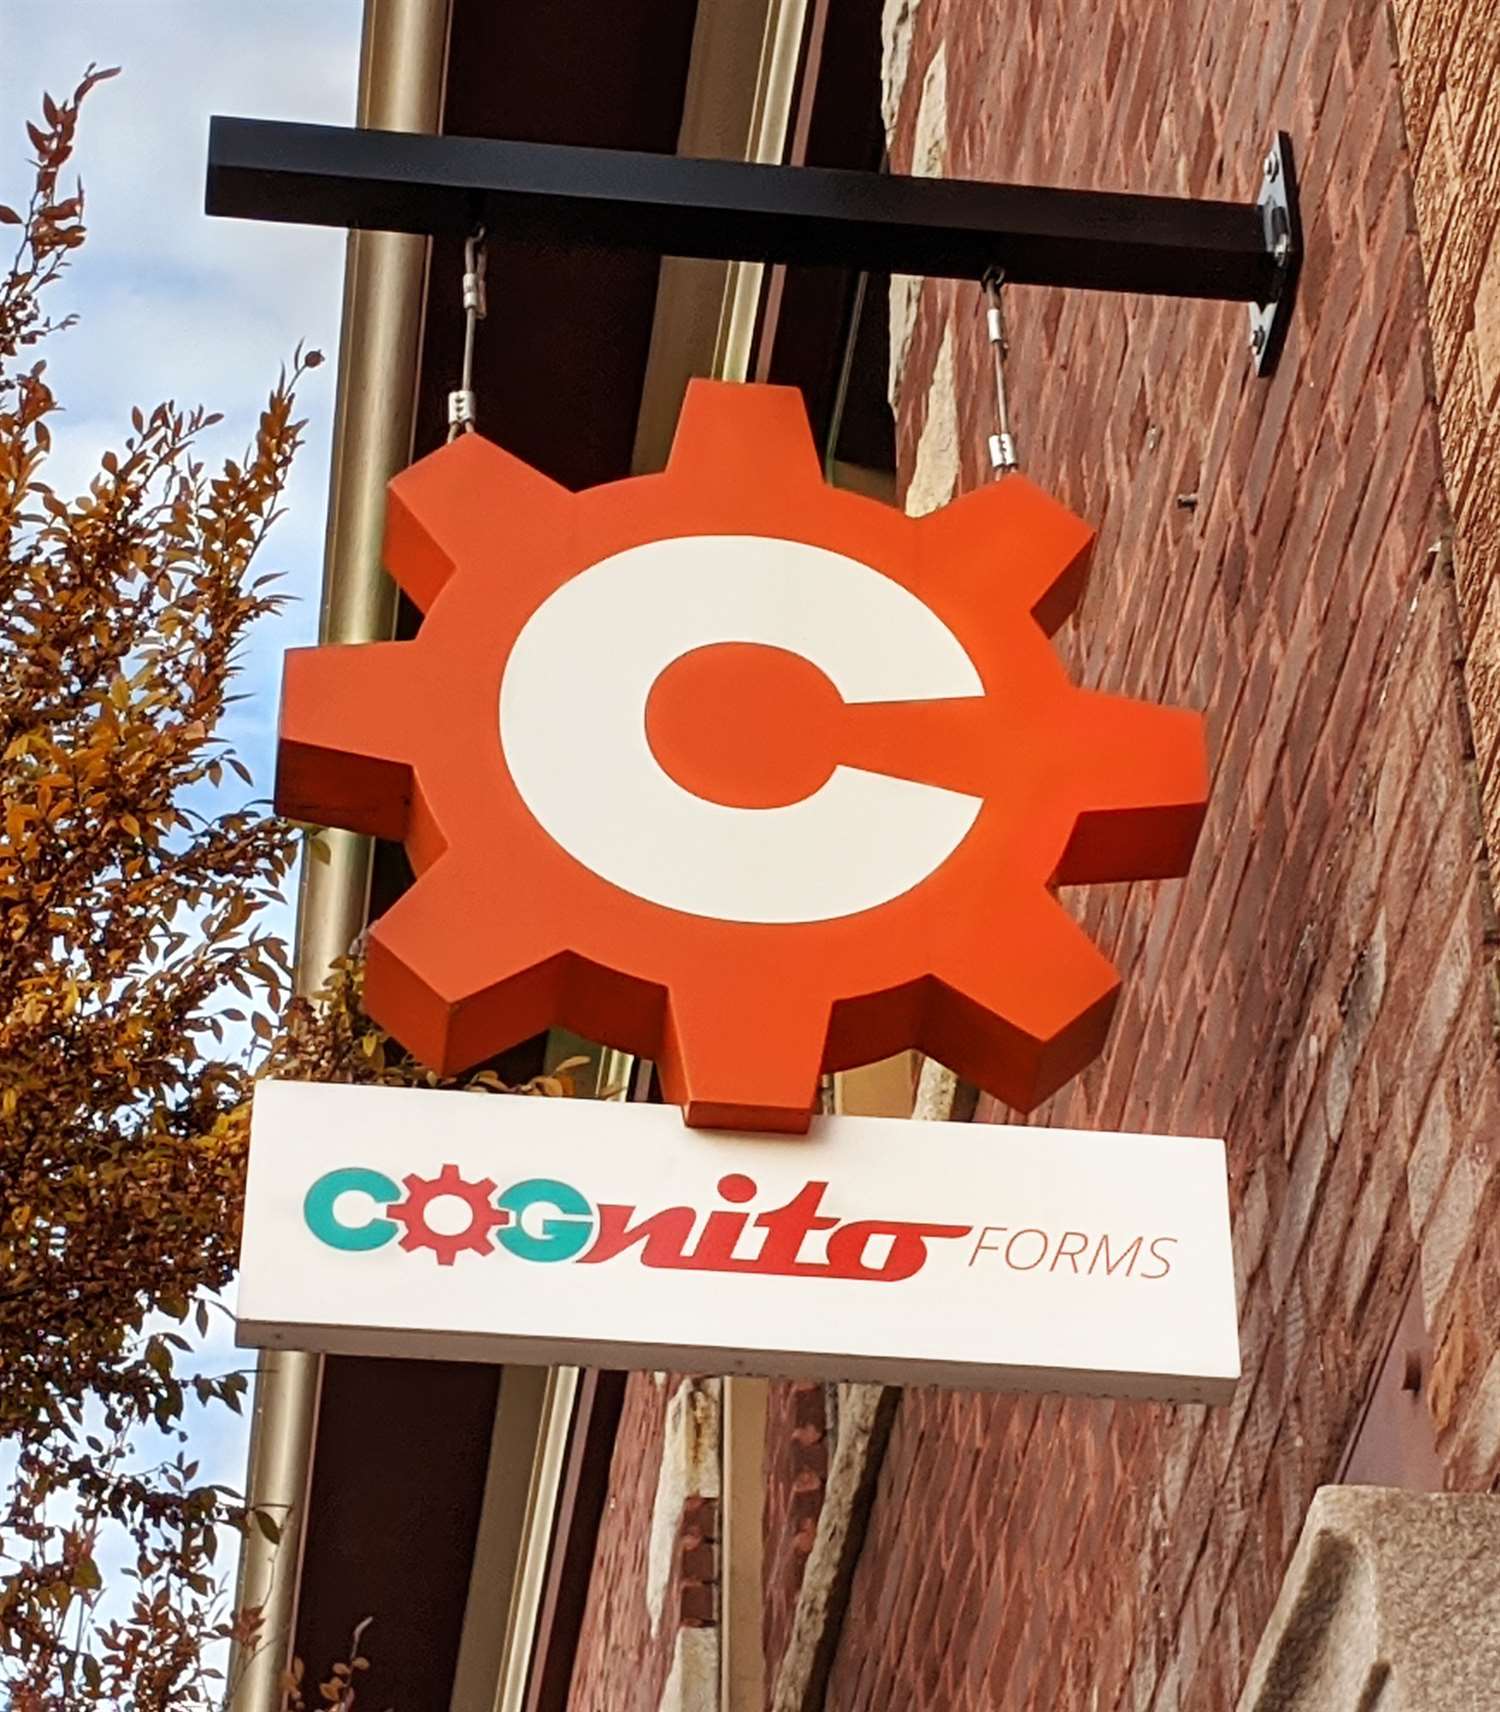 The sign above Cognito's front door.